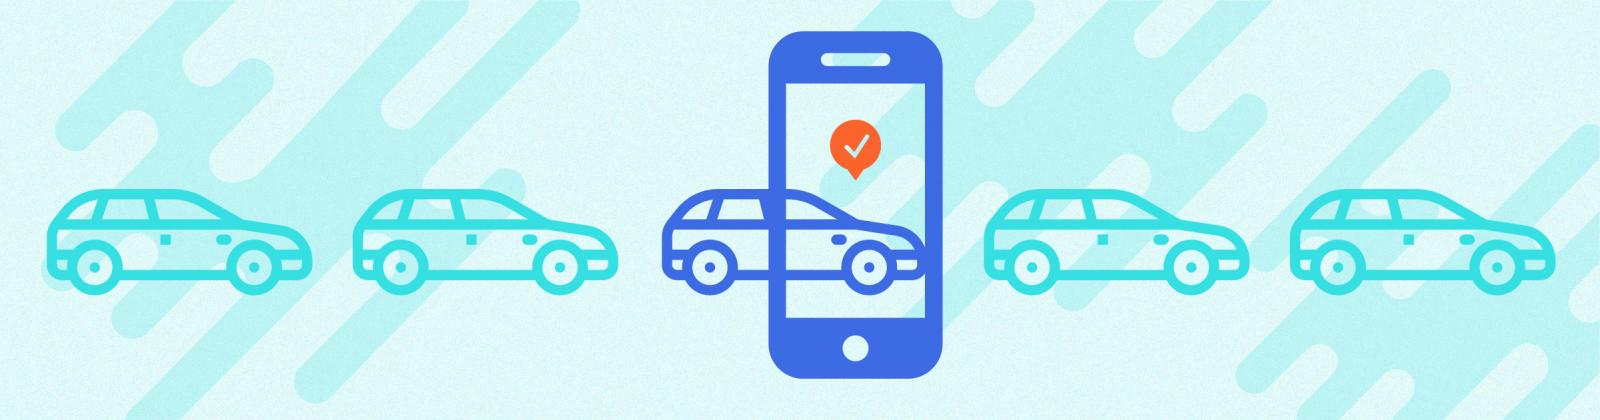 Abstract illustration of booking car share cars on your smartphone